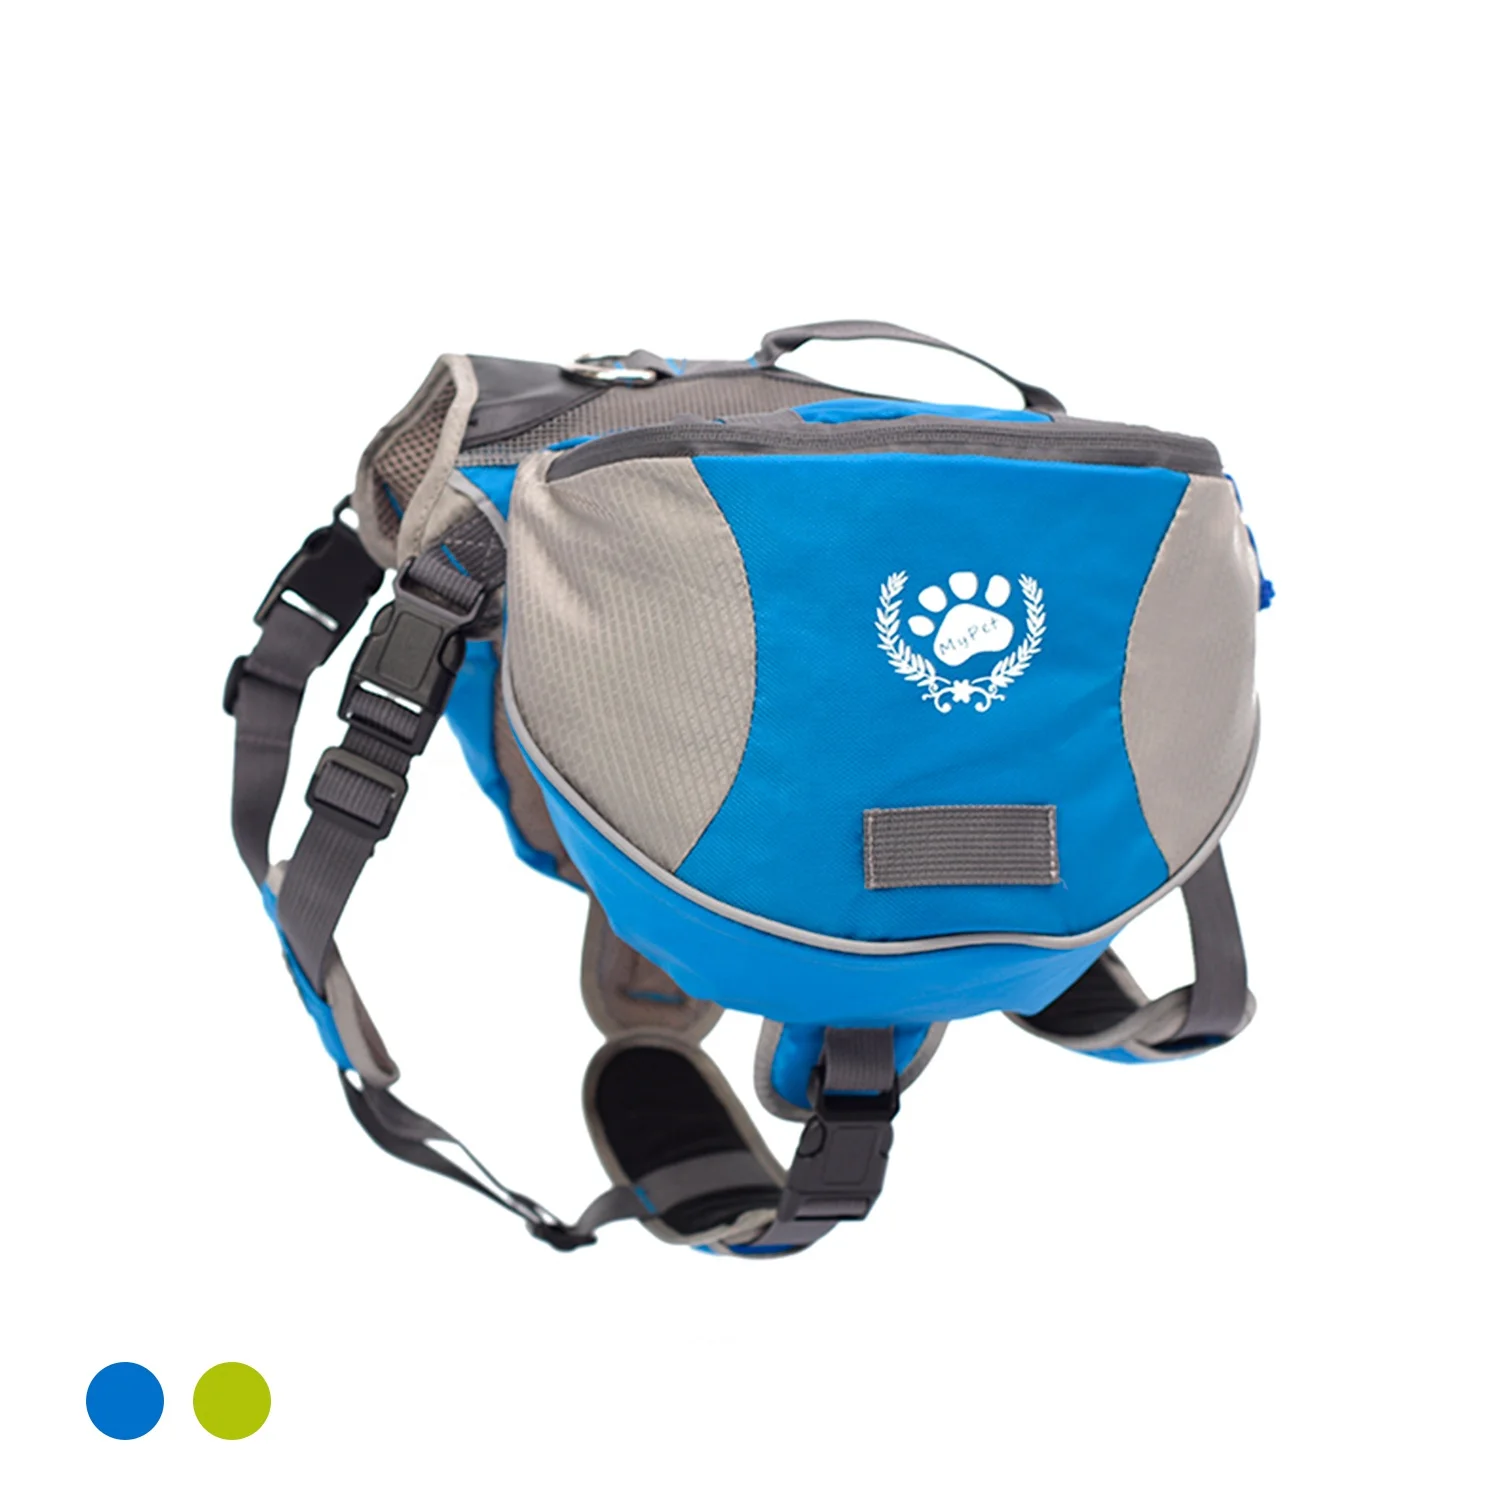 

MyPet Stock Pet Carrier Bags Dog Travel Carrying Bag Backpack for Hiking Camping, Blue